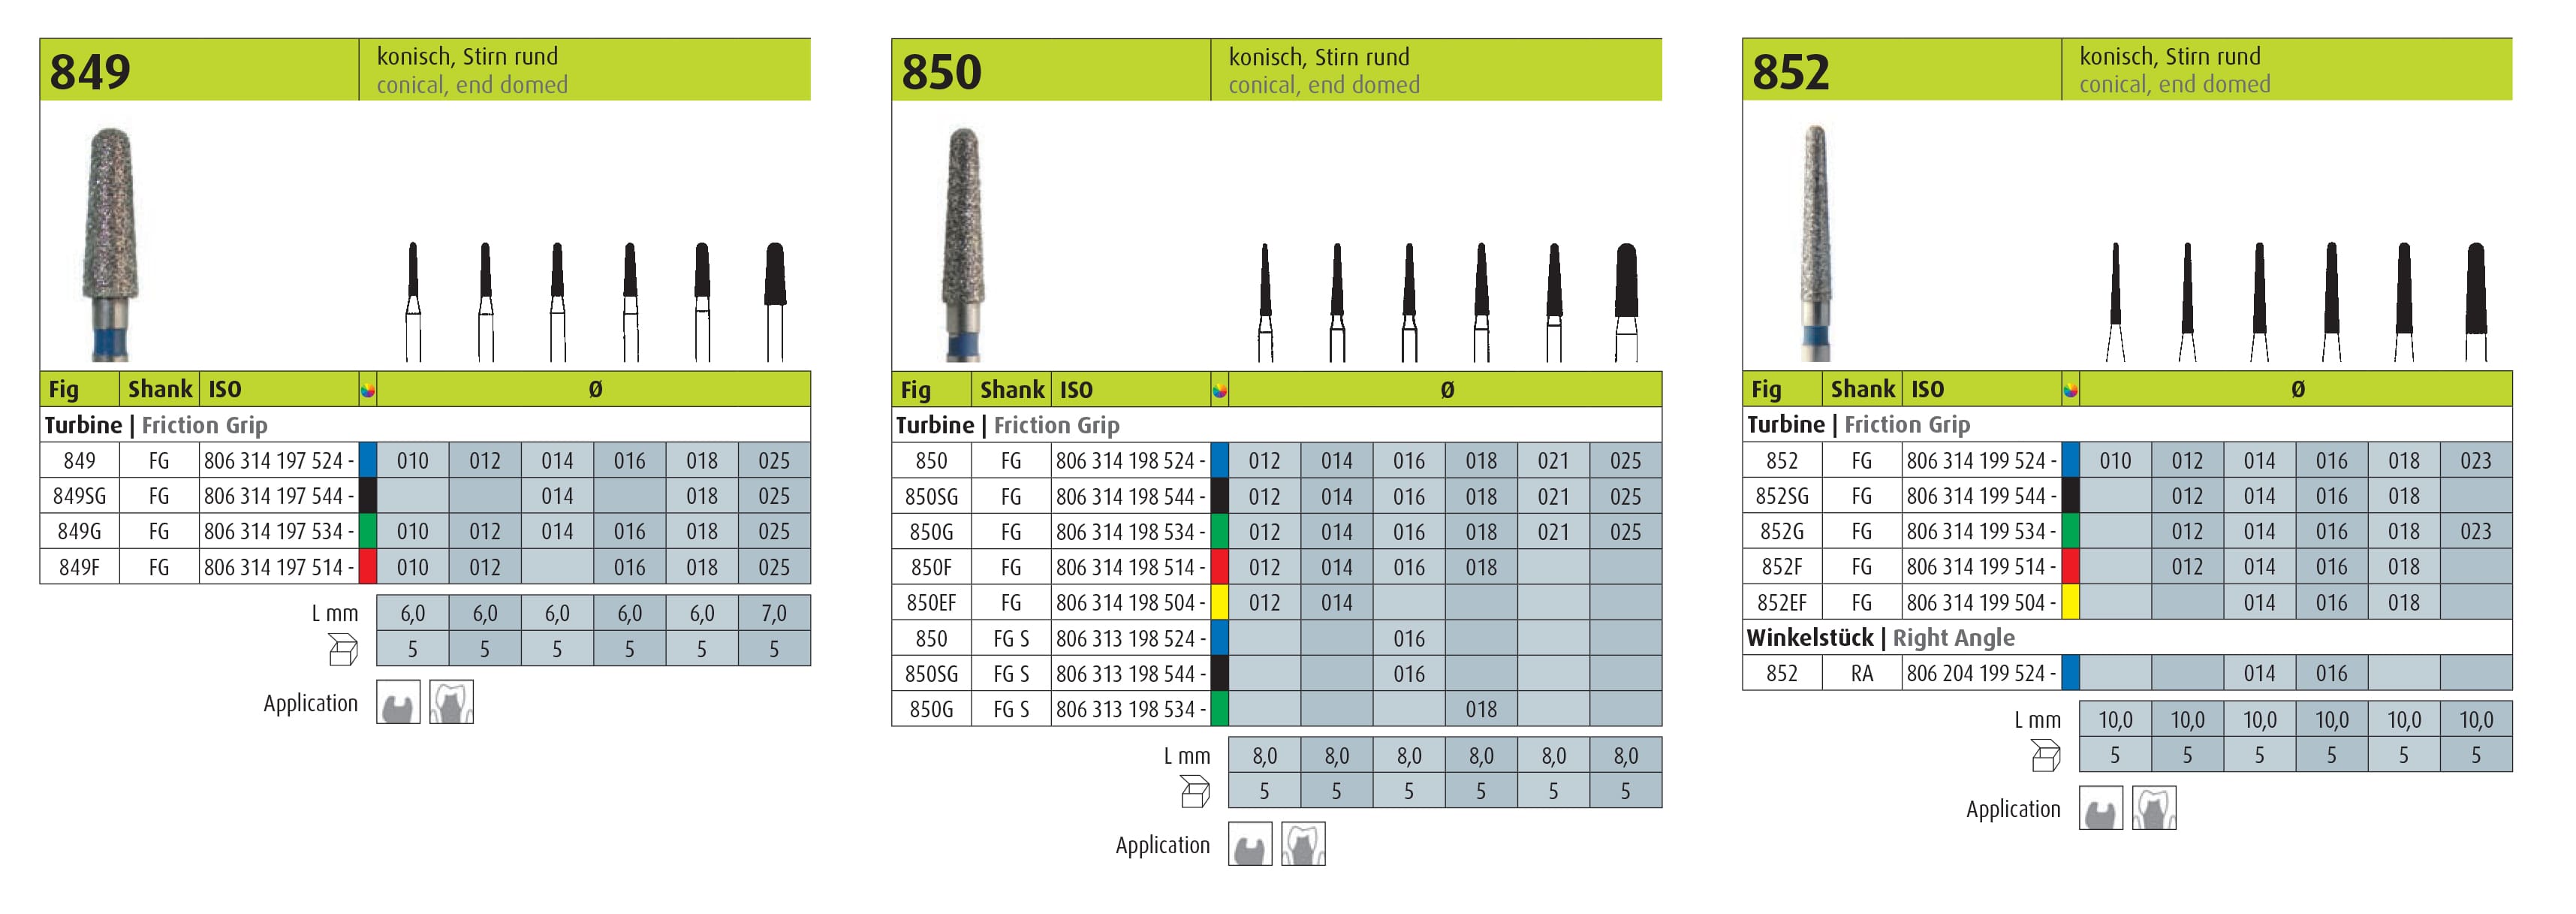 jota 849, 850, 852 conical round domed burs